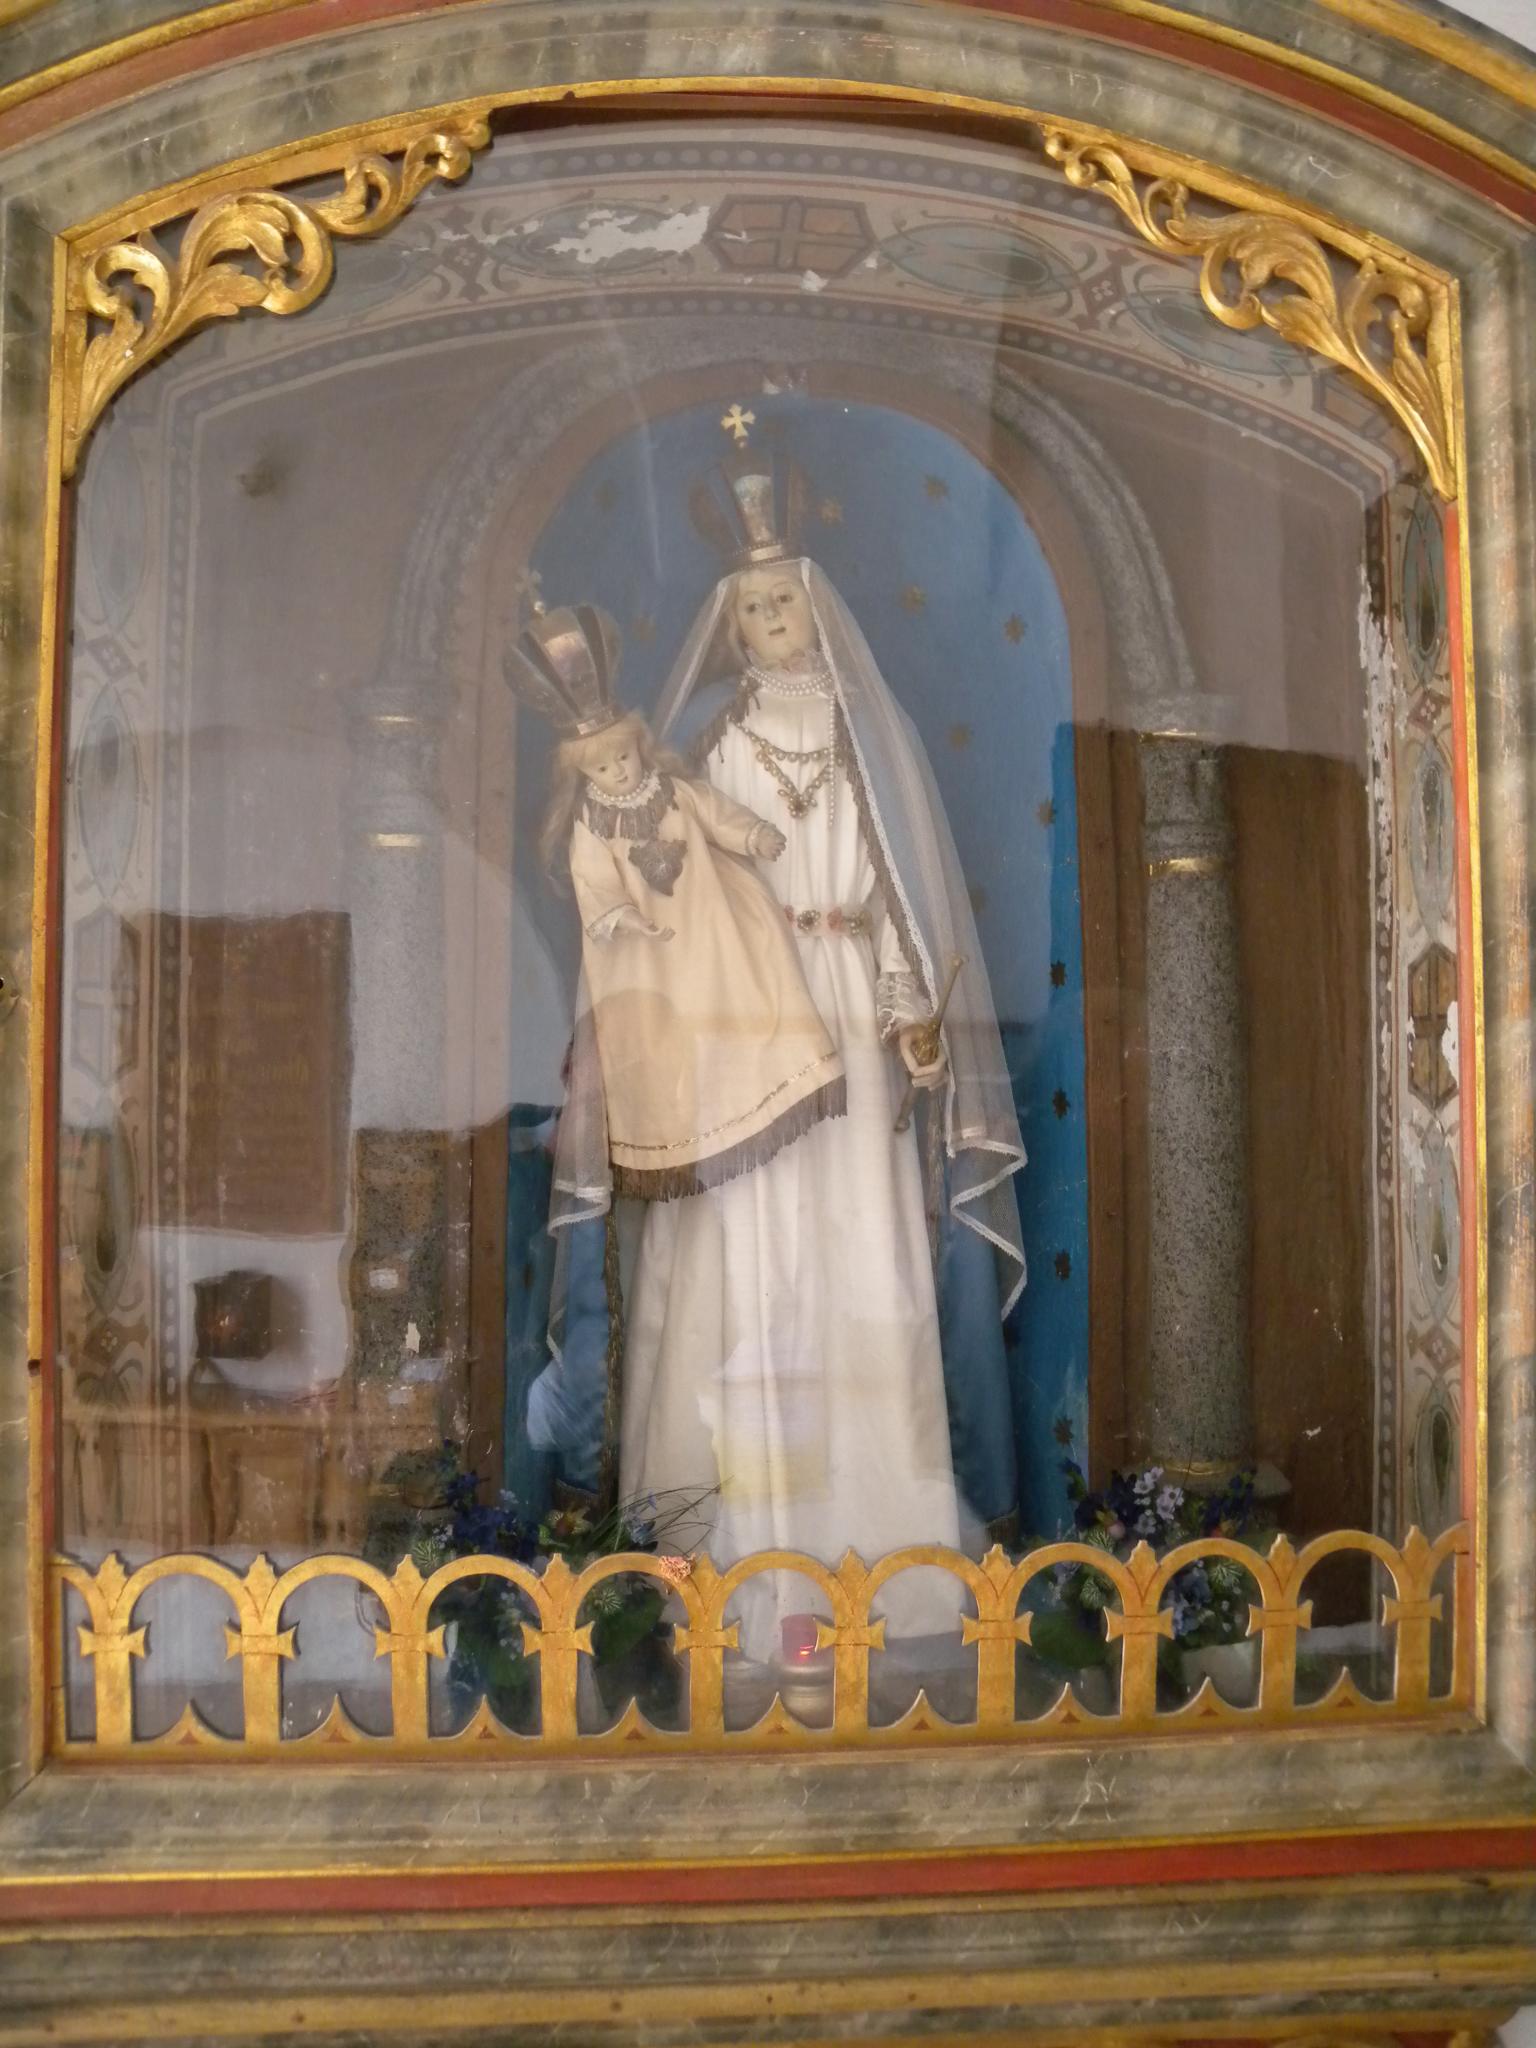 a statue of an catholic man in a shrine